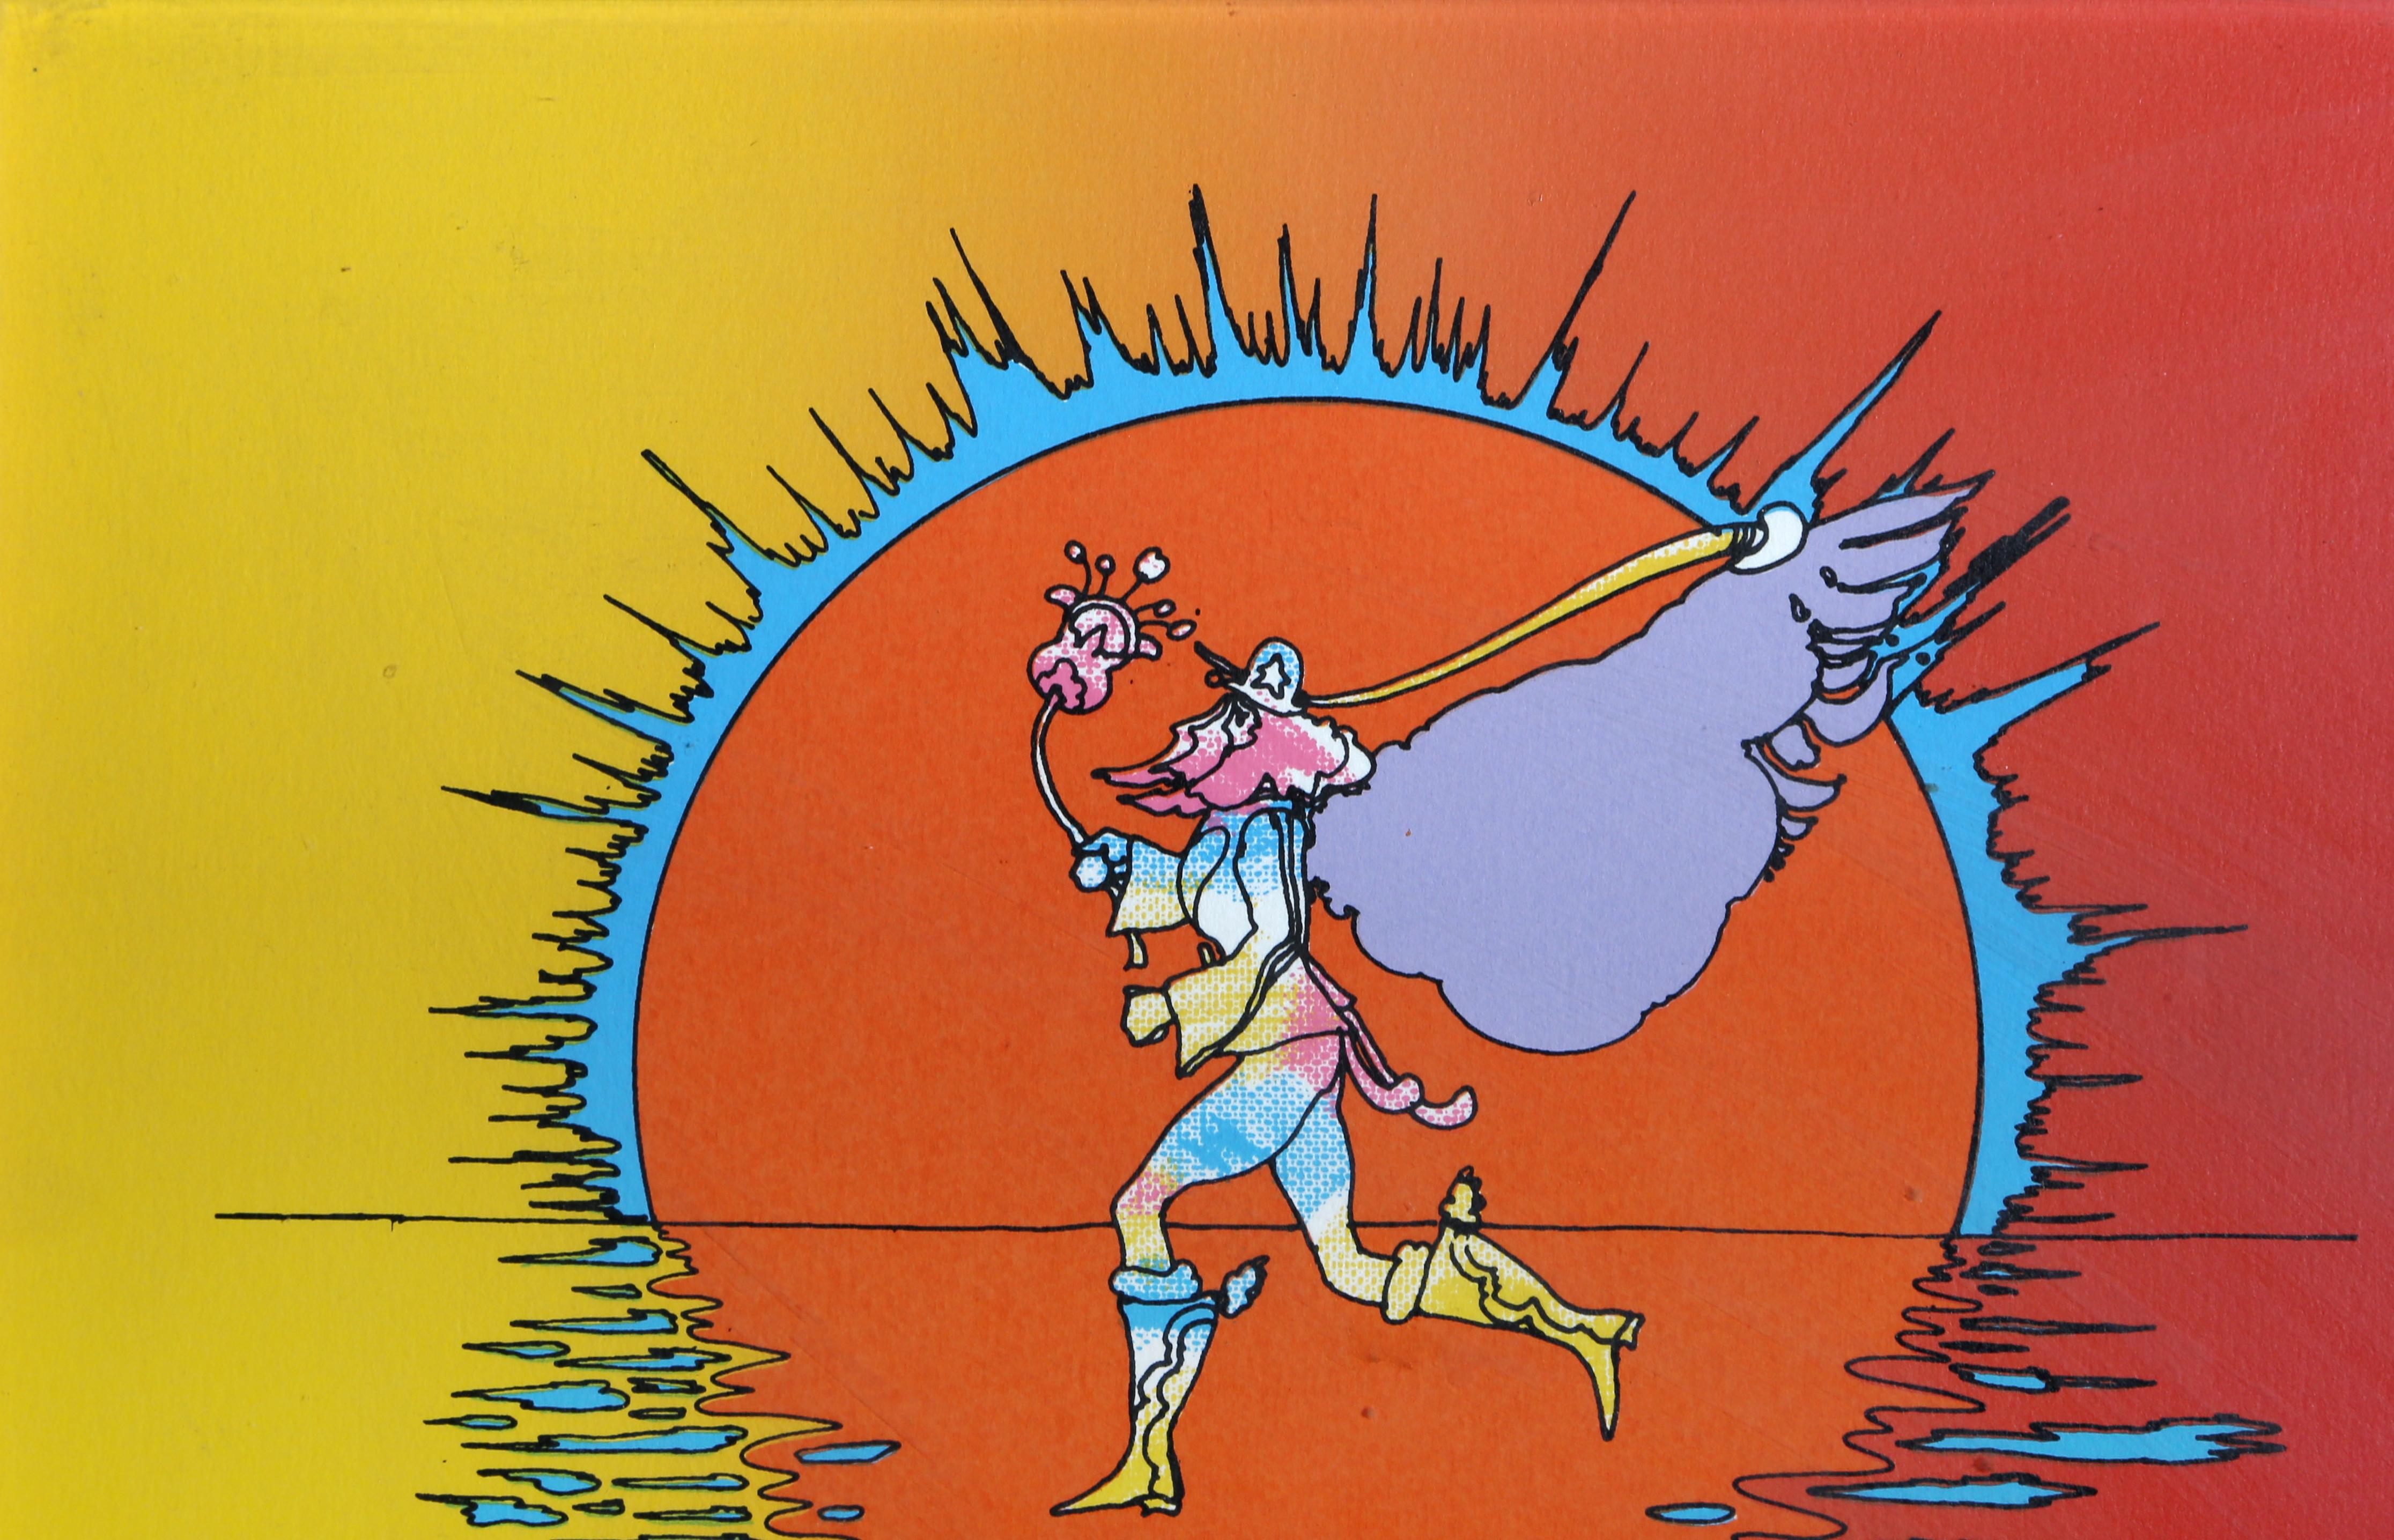 If Series: Runner
Peter Max, German/American (1937)
Date: 1981
Screenprint, signed and dedicated in pencil
Edition: A/P
Size: 10 in. x 14 in. (25.4 cm x 35.56 cm)
Frame Size: 16.75 x 20.5 inches